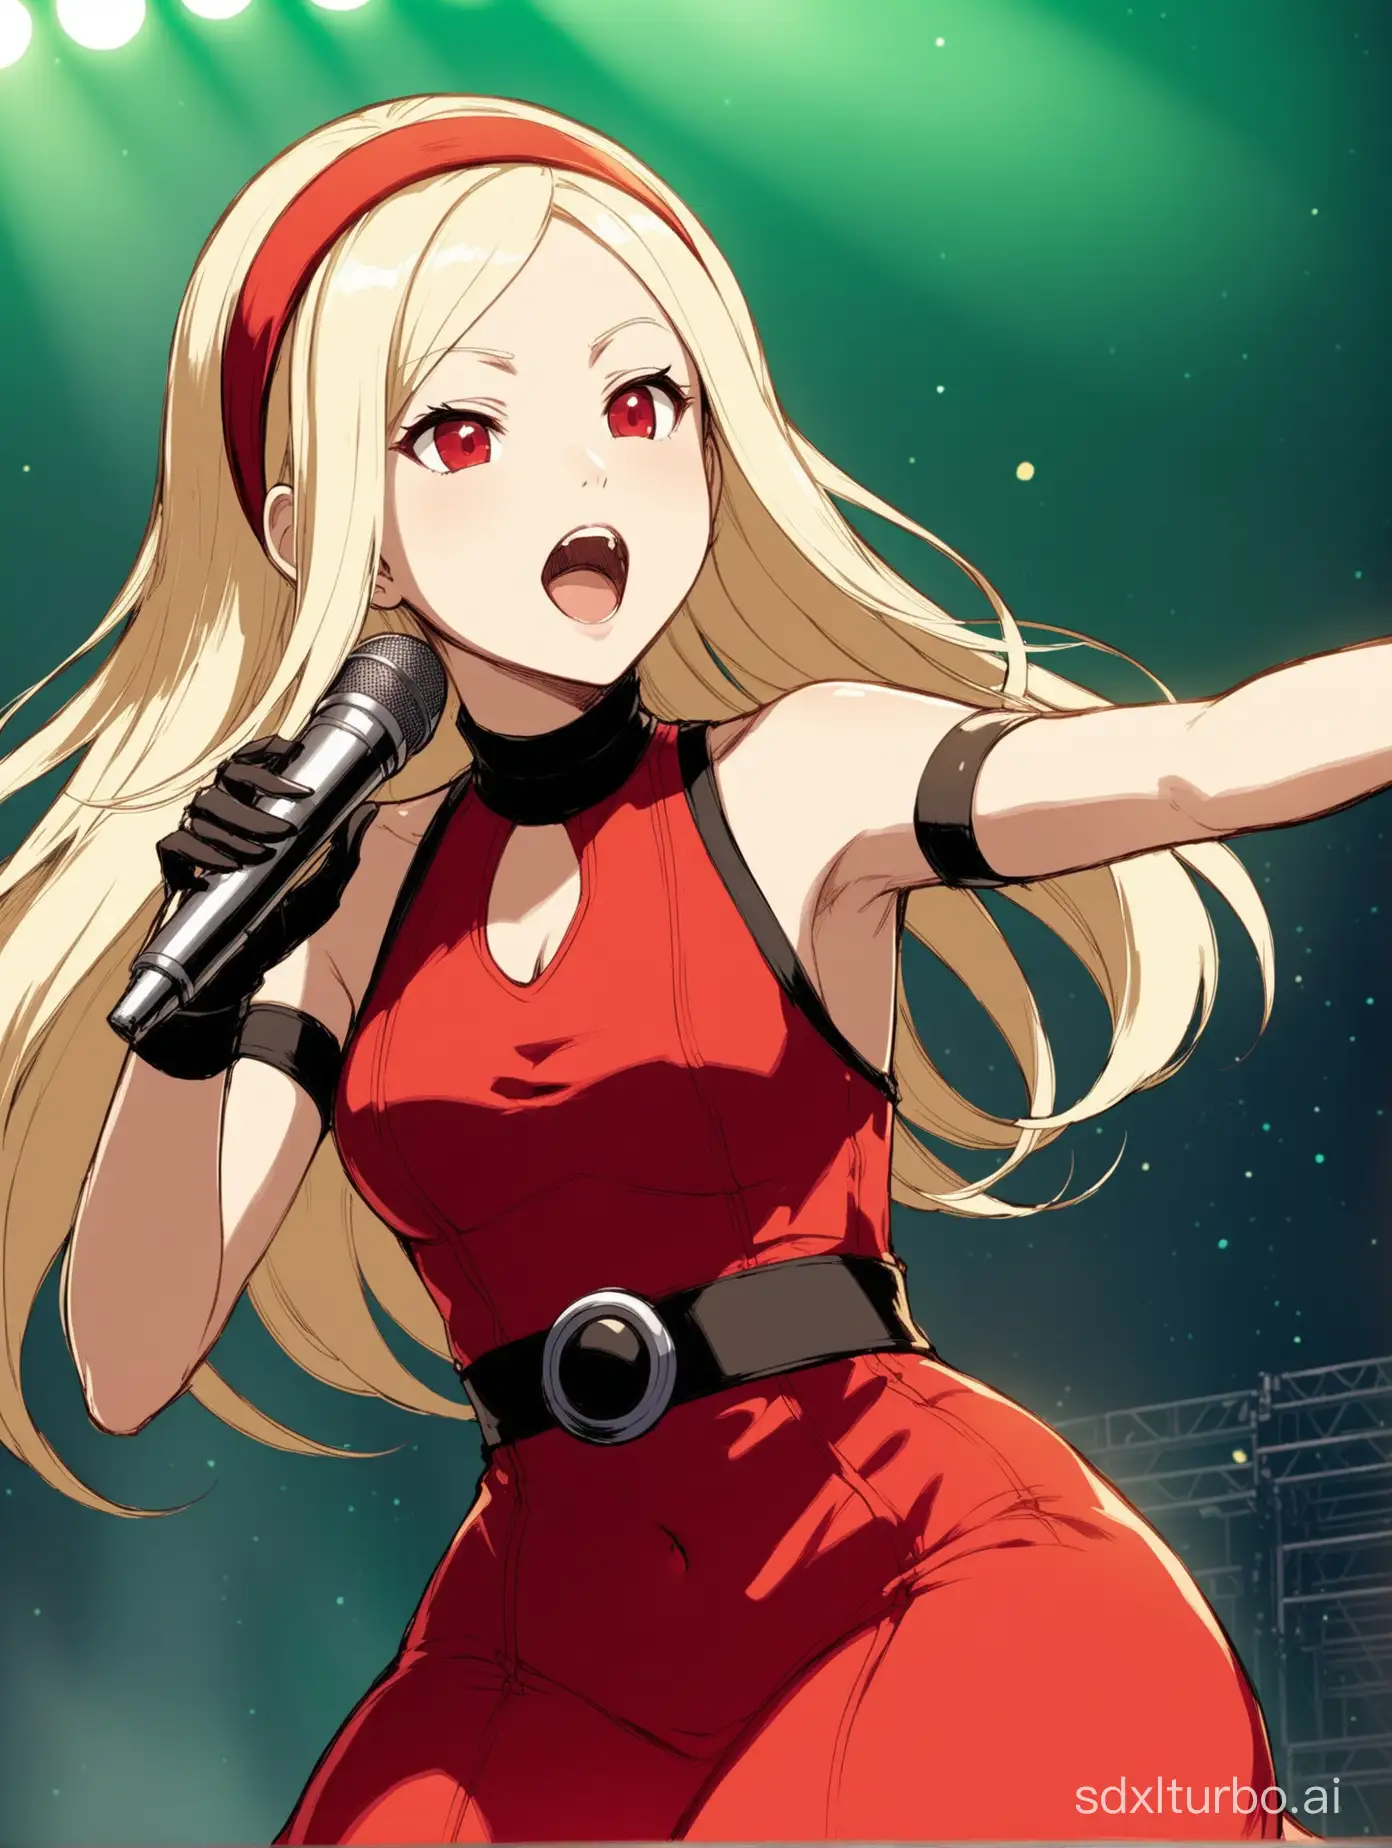 kat from gravity rush 2 in red dress and hairband, singing on stage